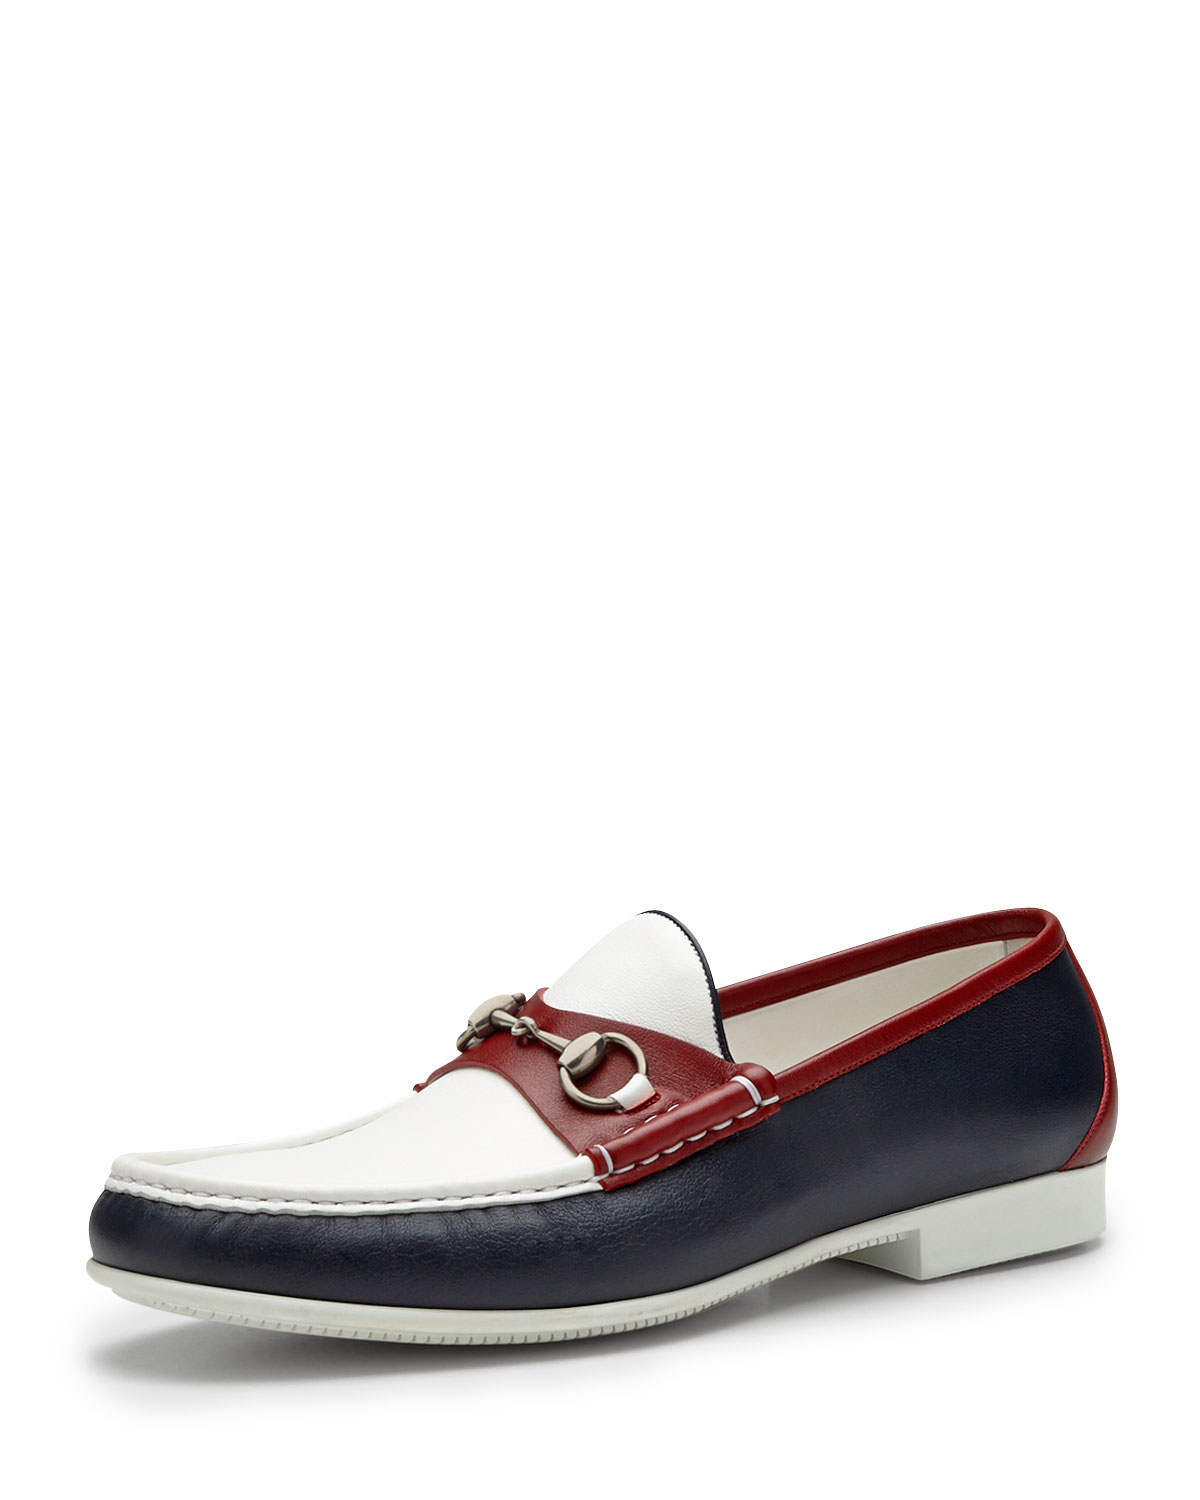 red white and blue loafers